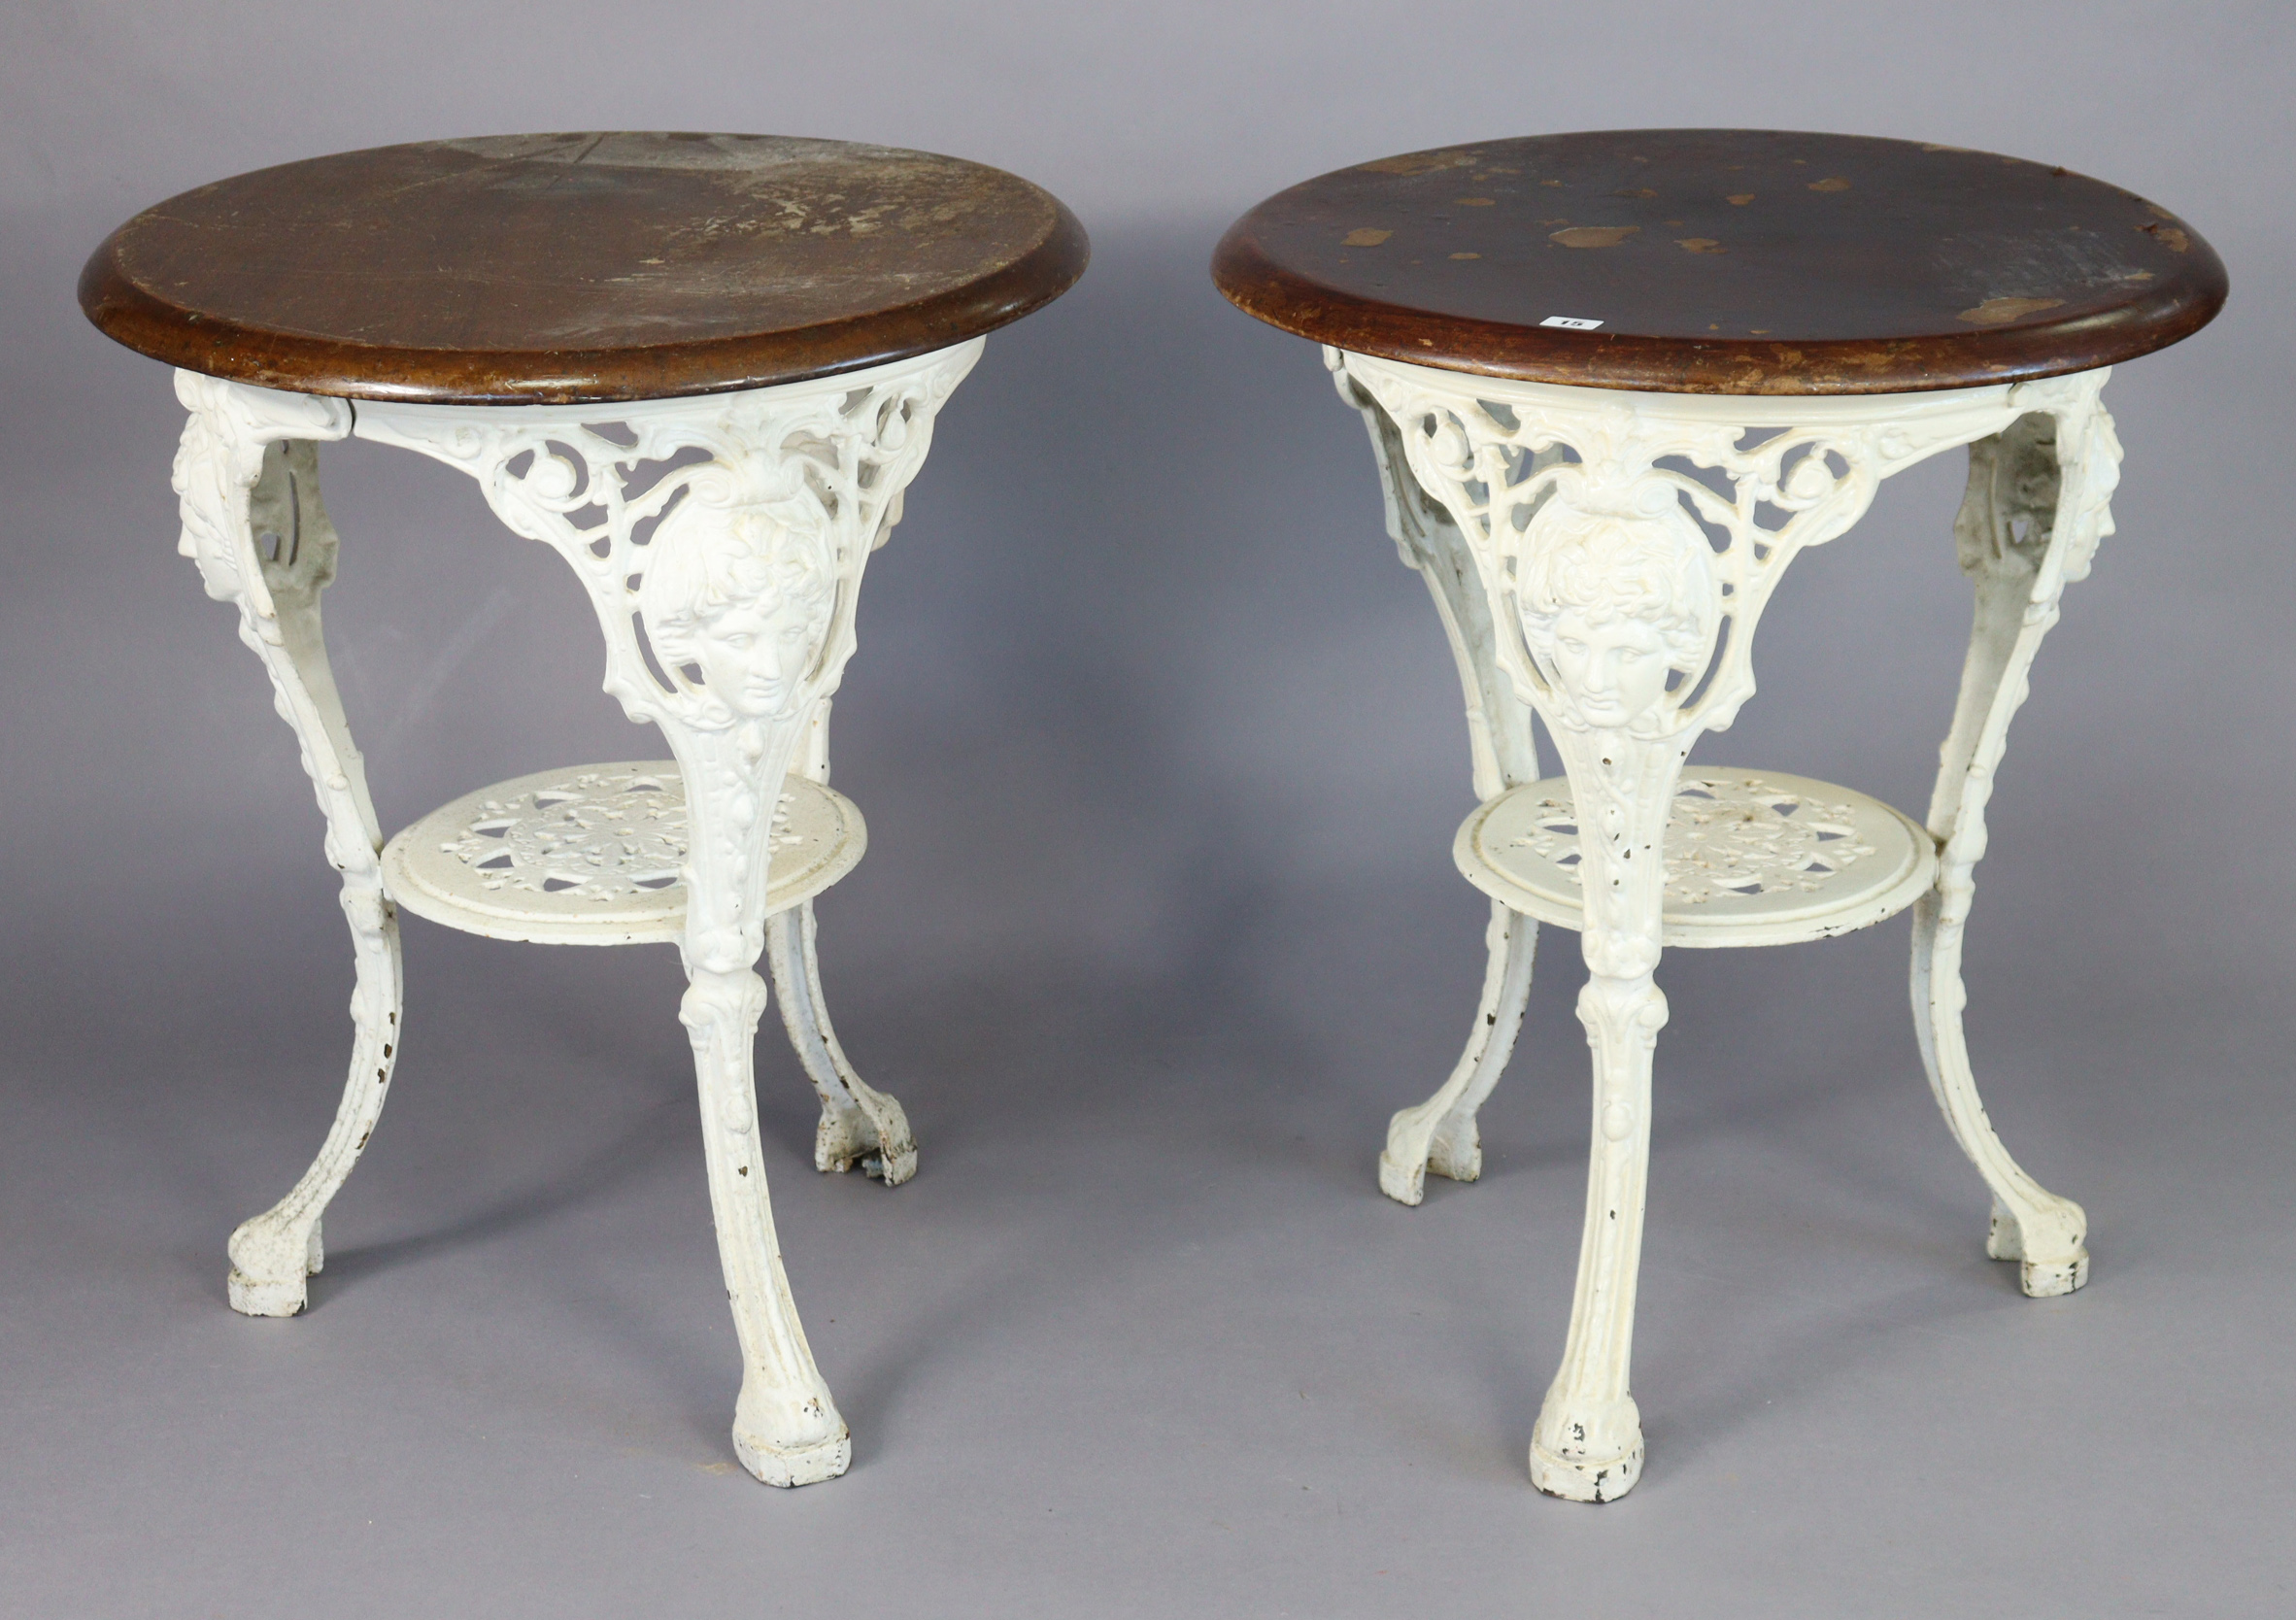 Two white painted cast-iron “Britannia” pub tables, each with a wooden top, 23½” diameter x 28”